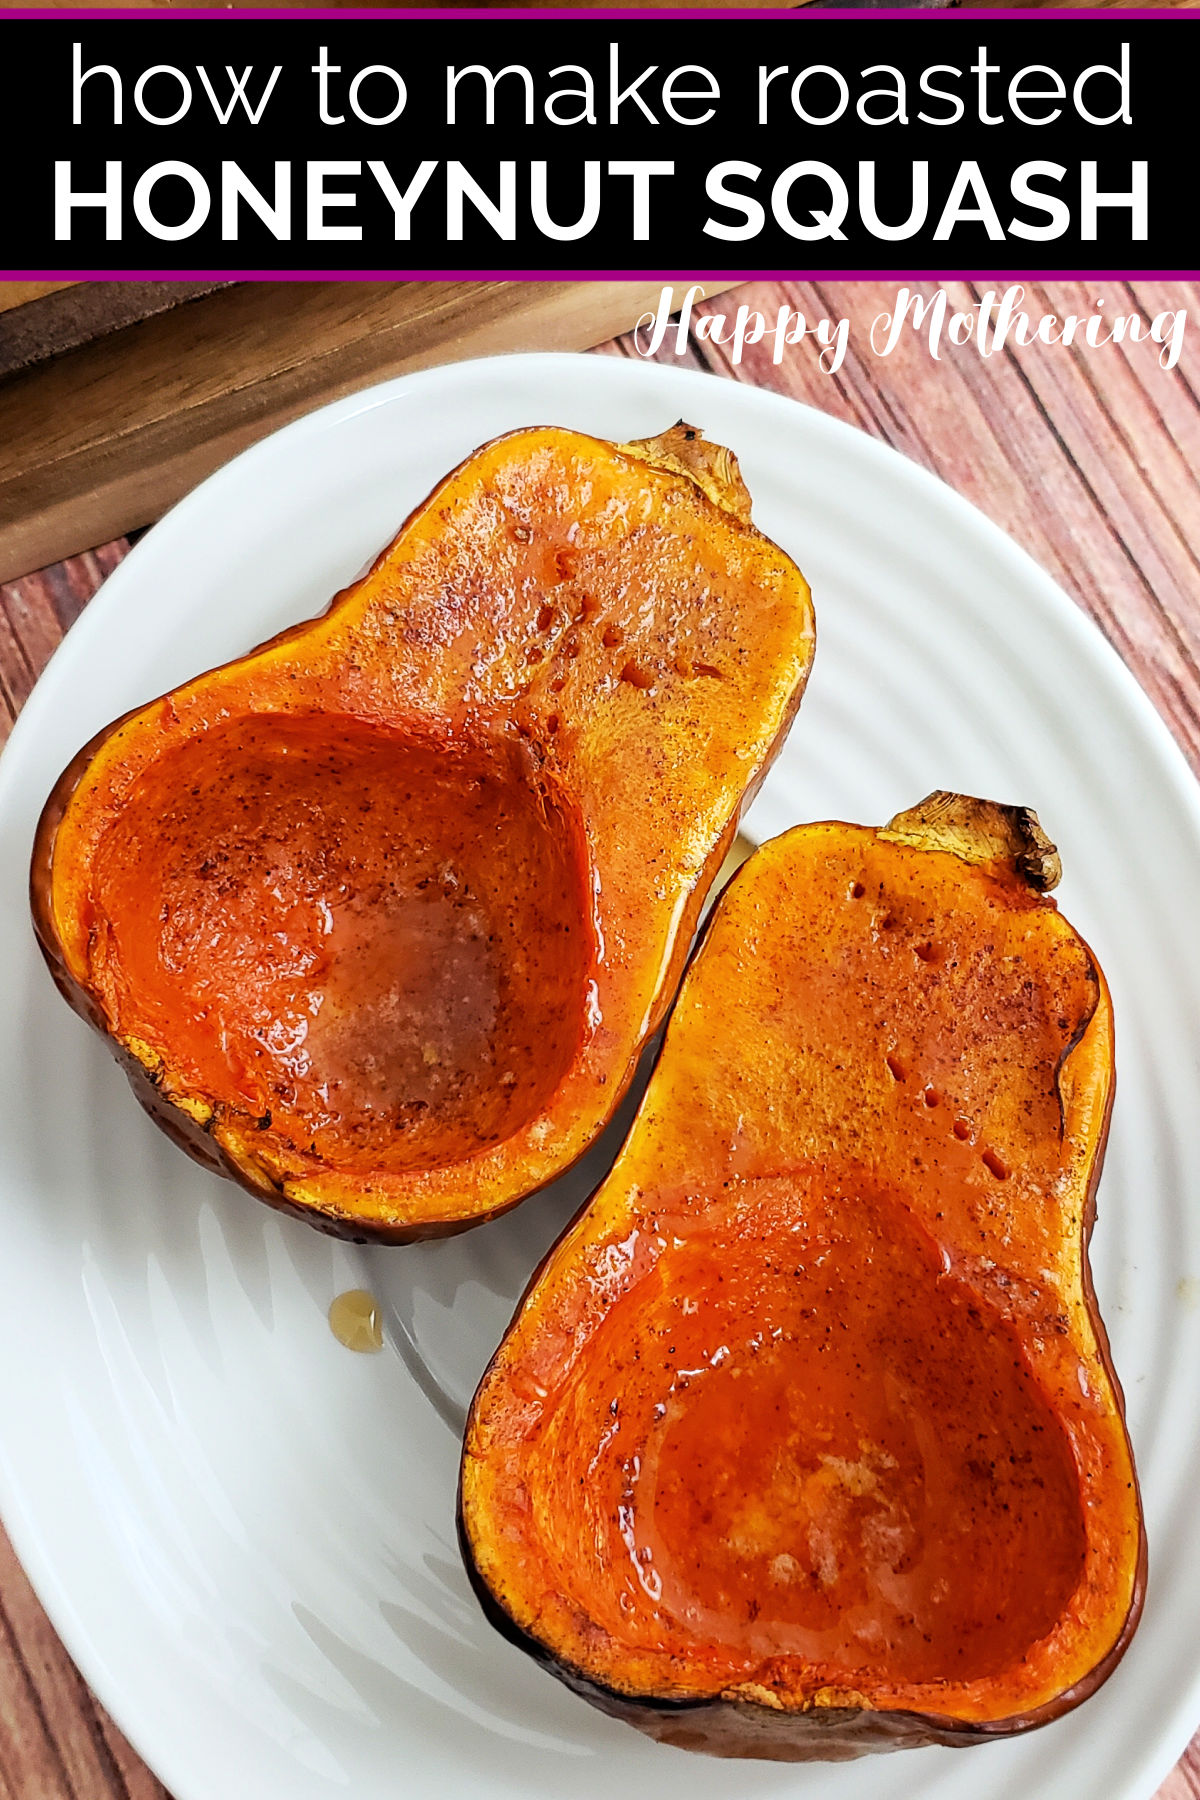 Two beautiful roasted honeynut squash halves on a white serving platter for dinner.